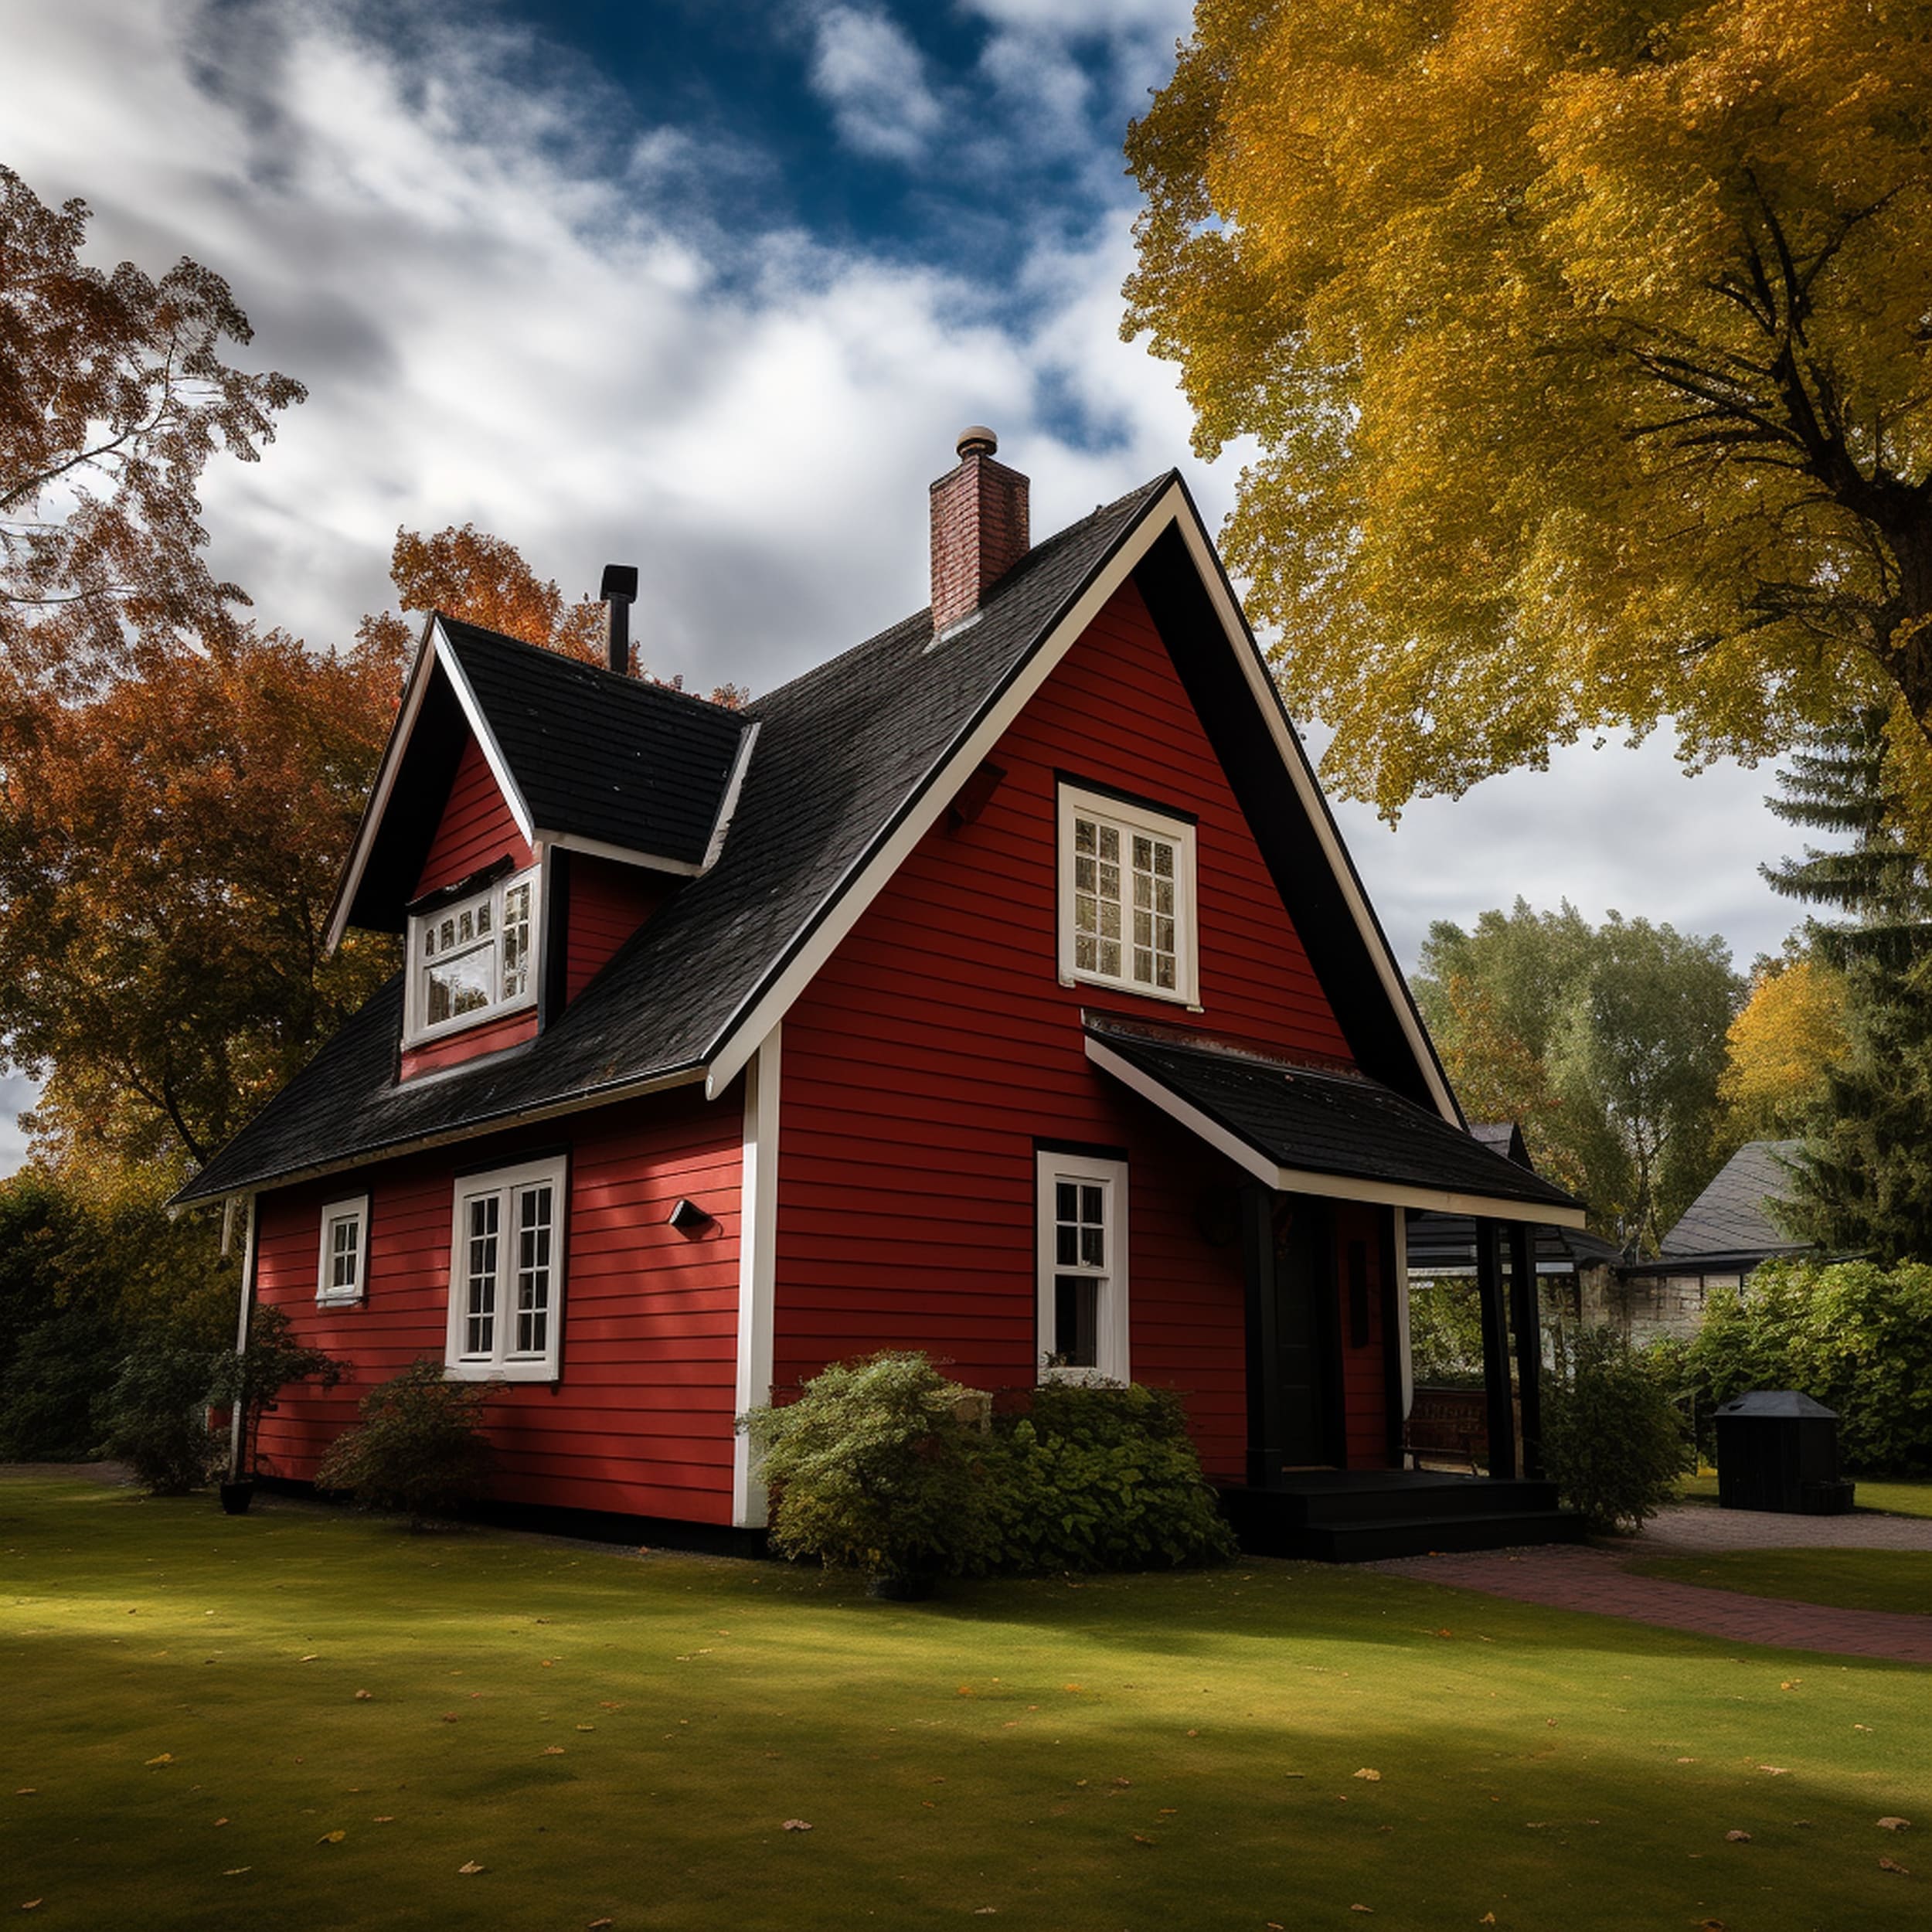 A Traditional House With a Black Roof and Red Siding